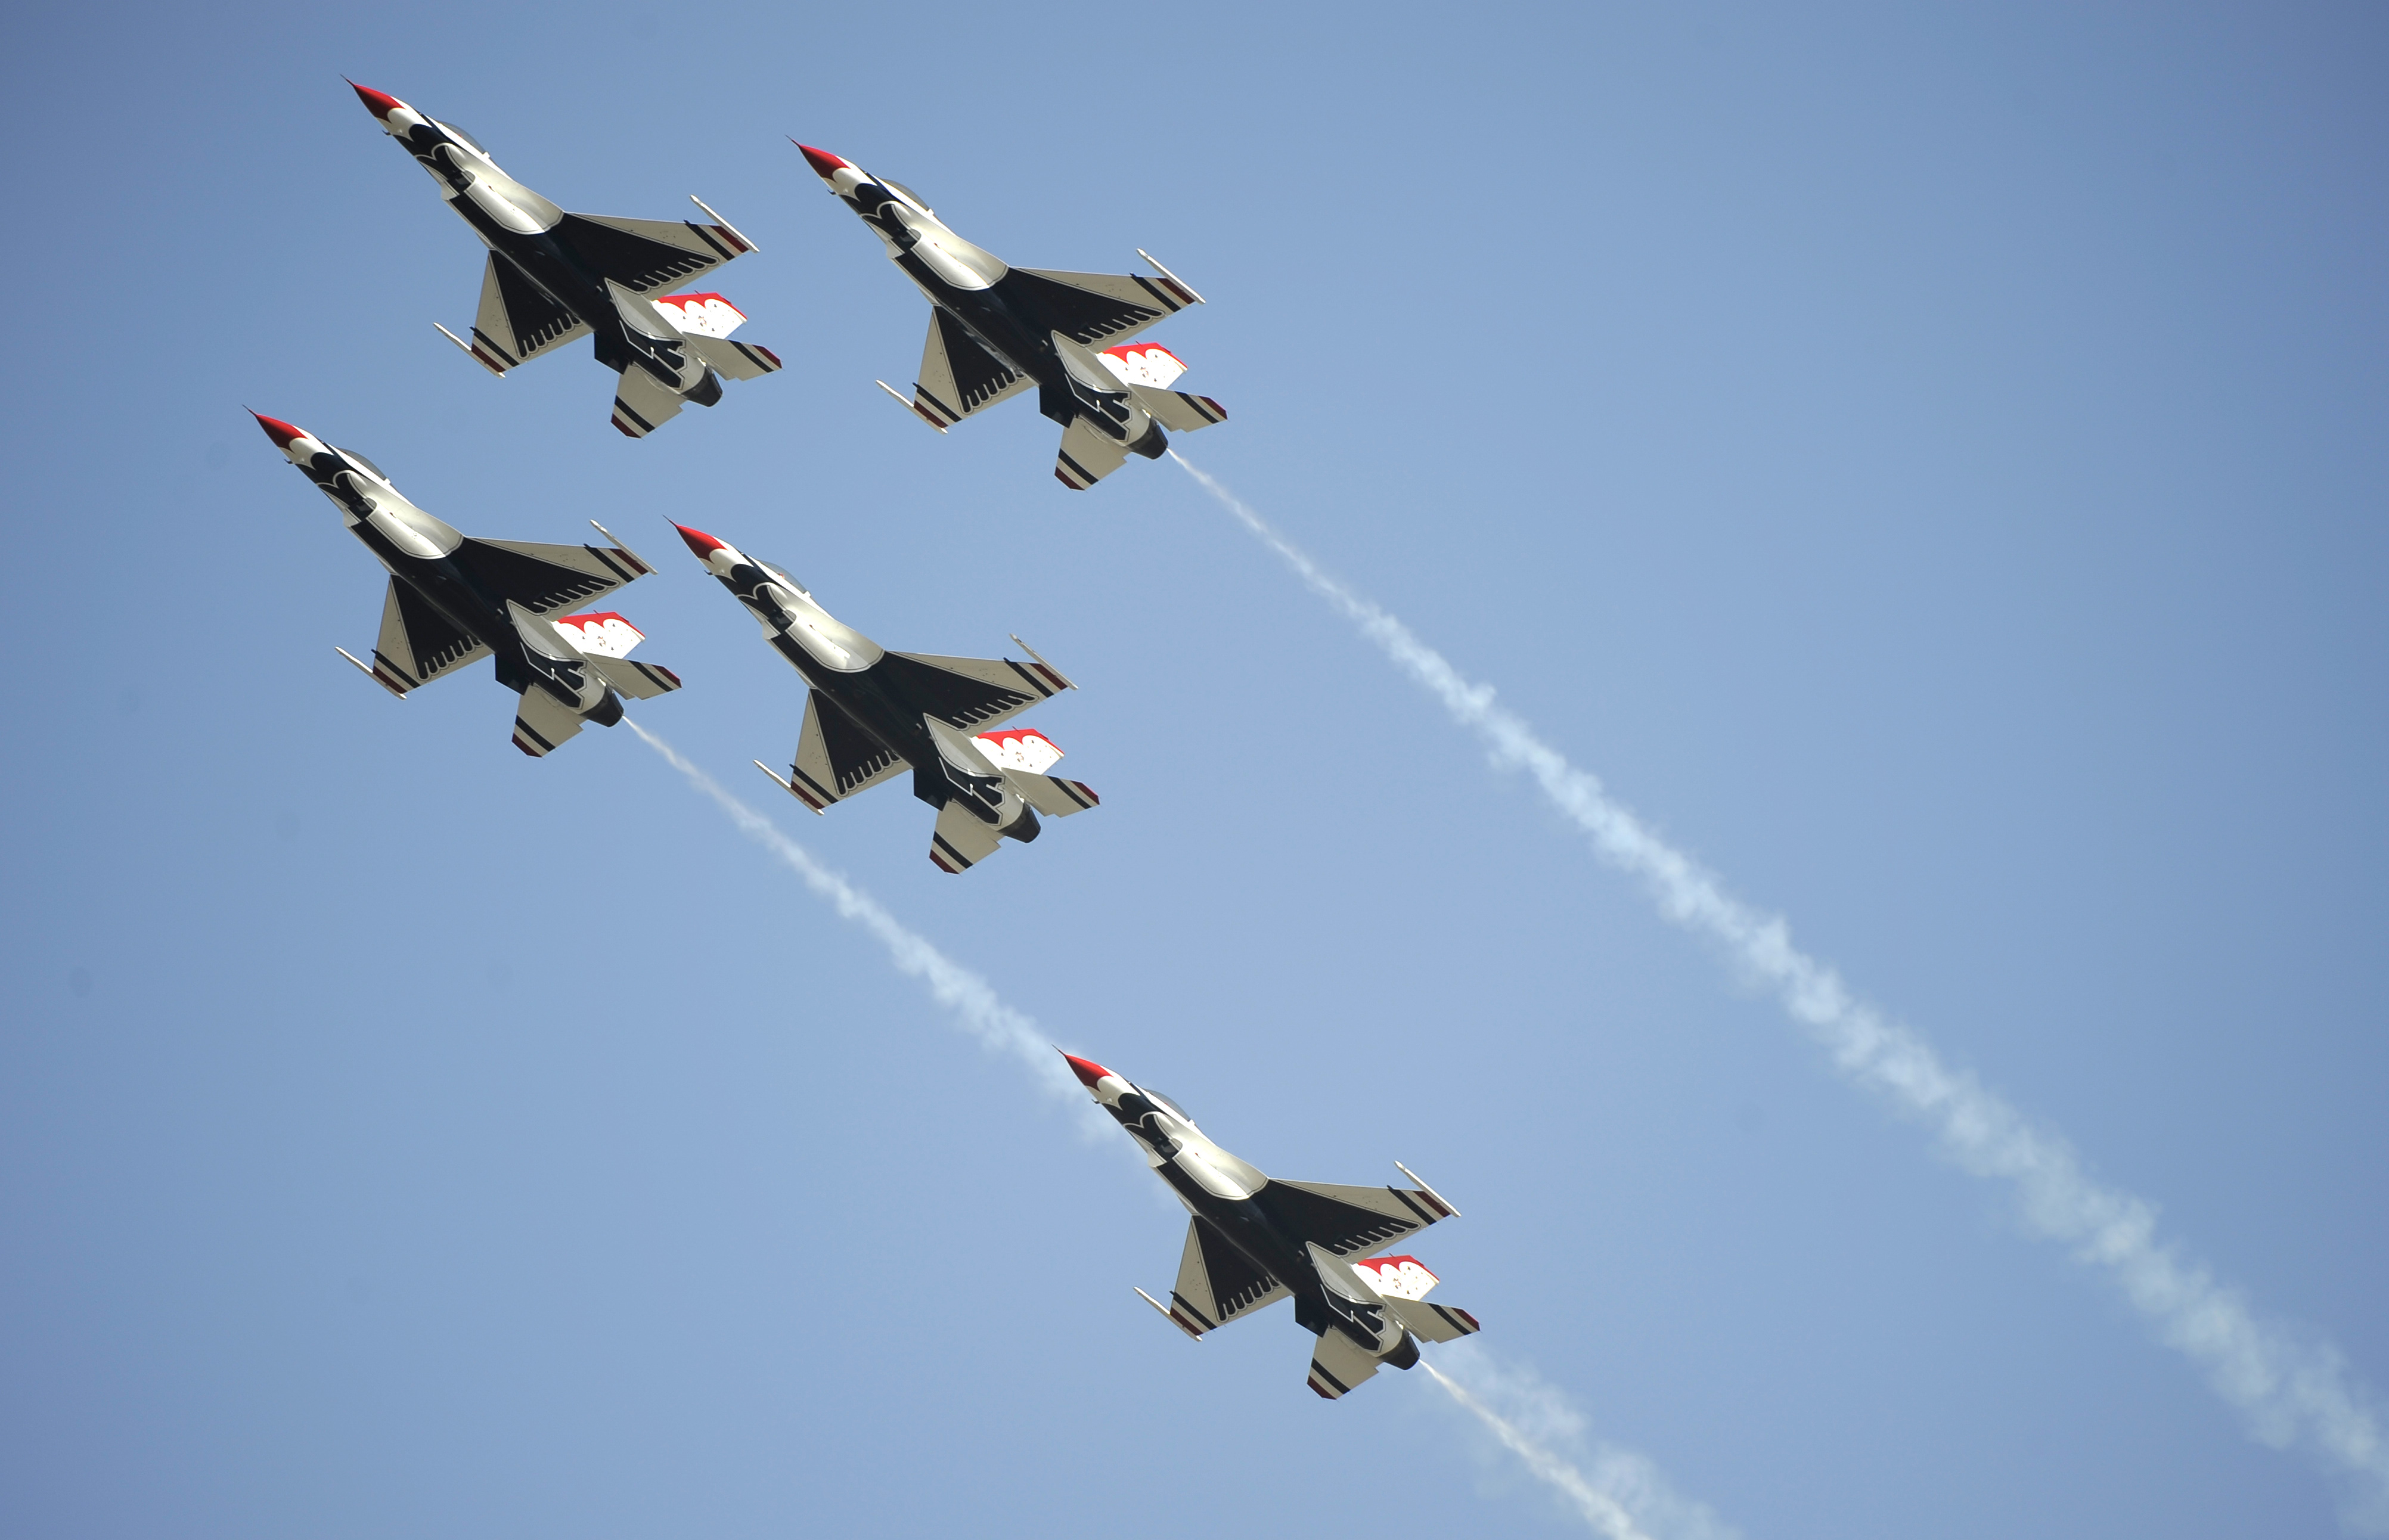 Thunderbirds release practice, performance schedule > United States Air